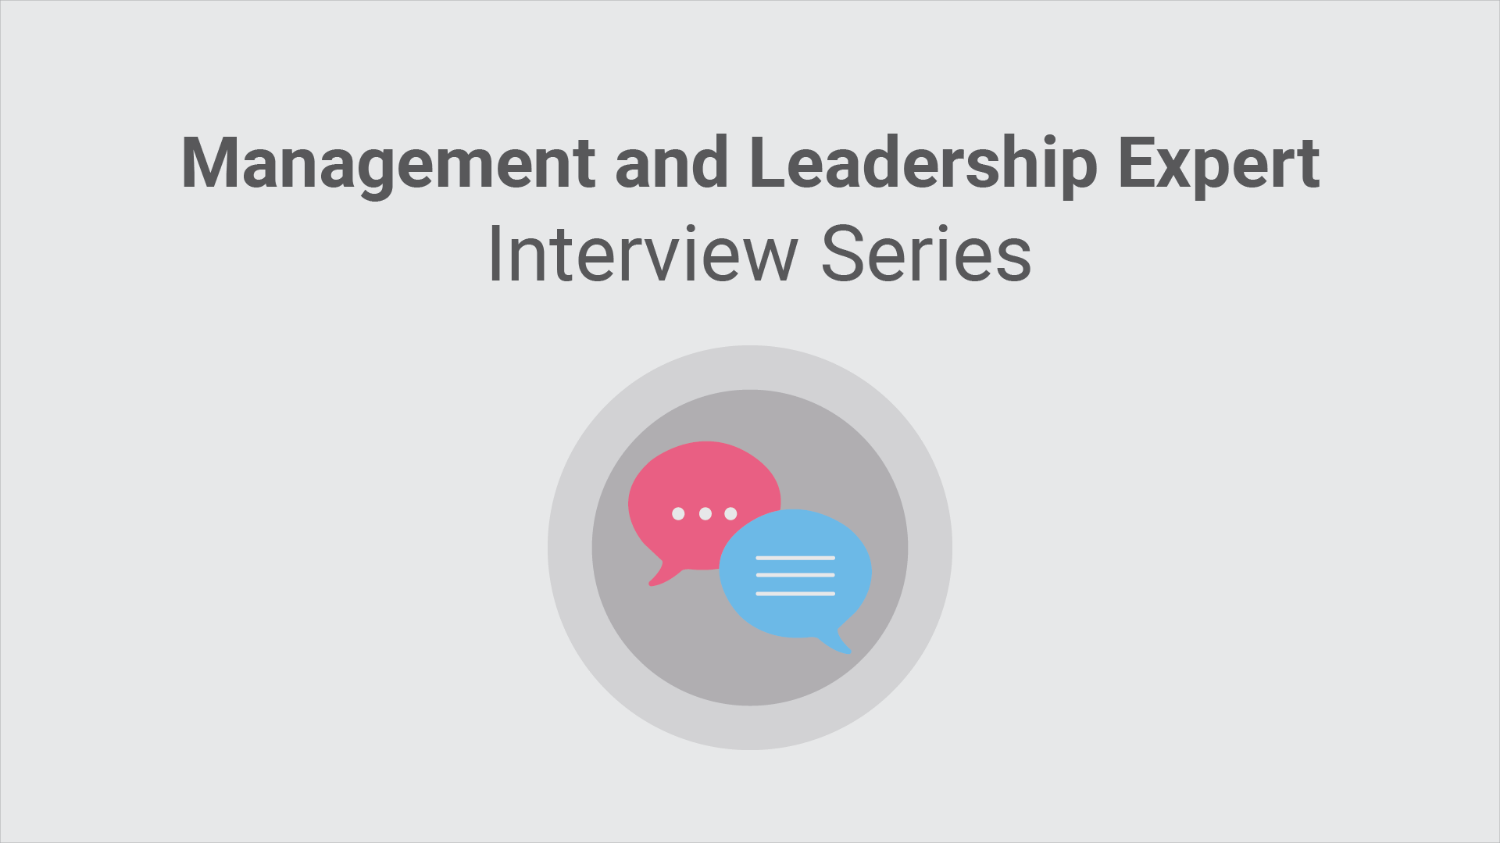 Management and leadership expert interview series